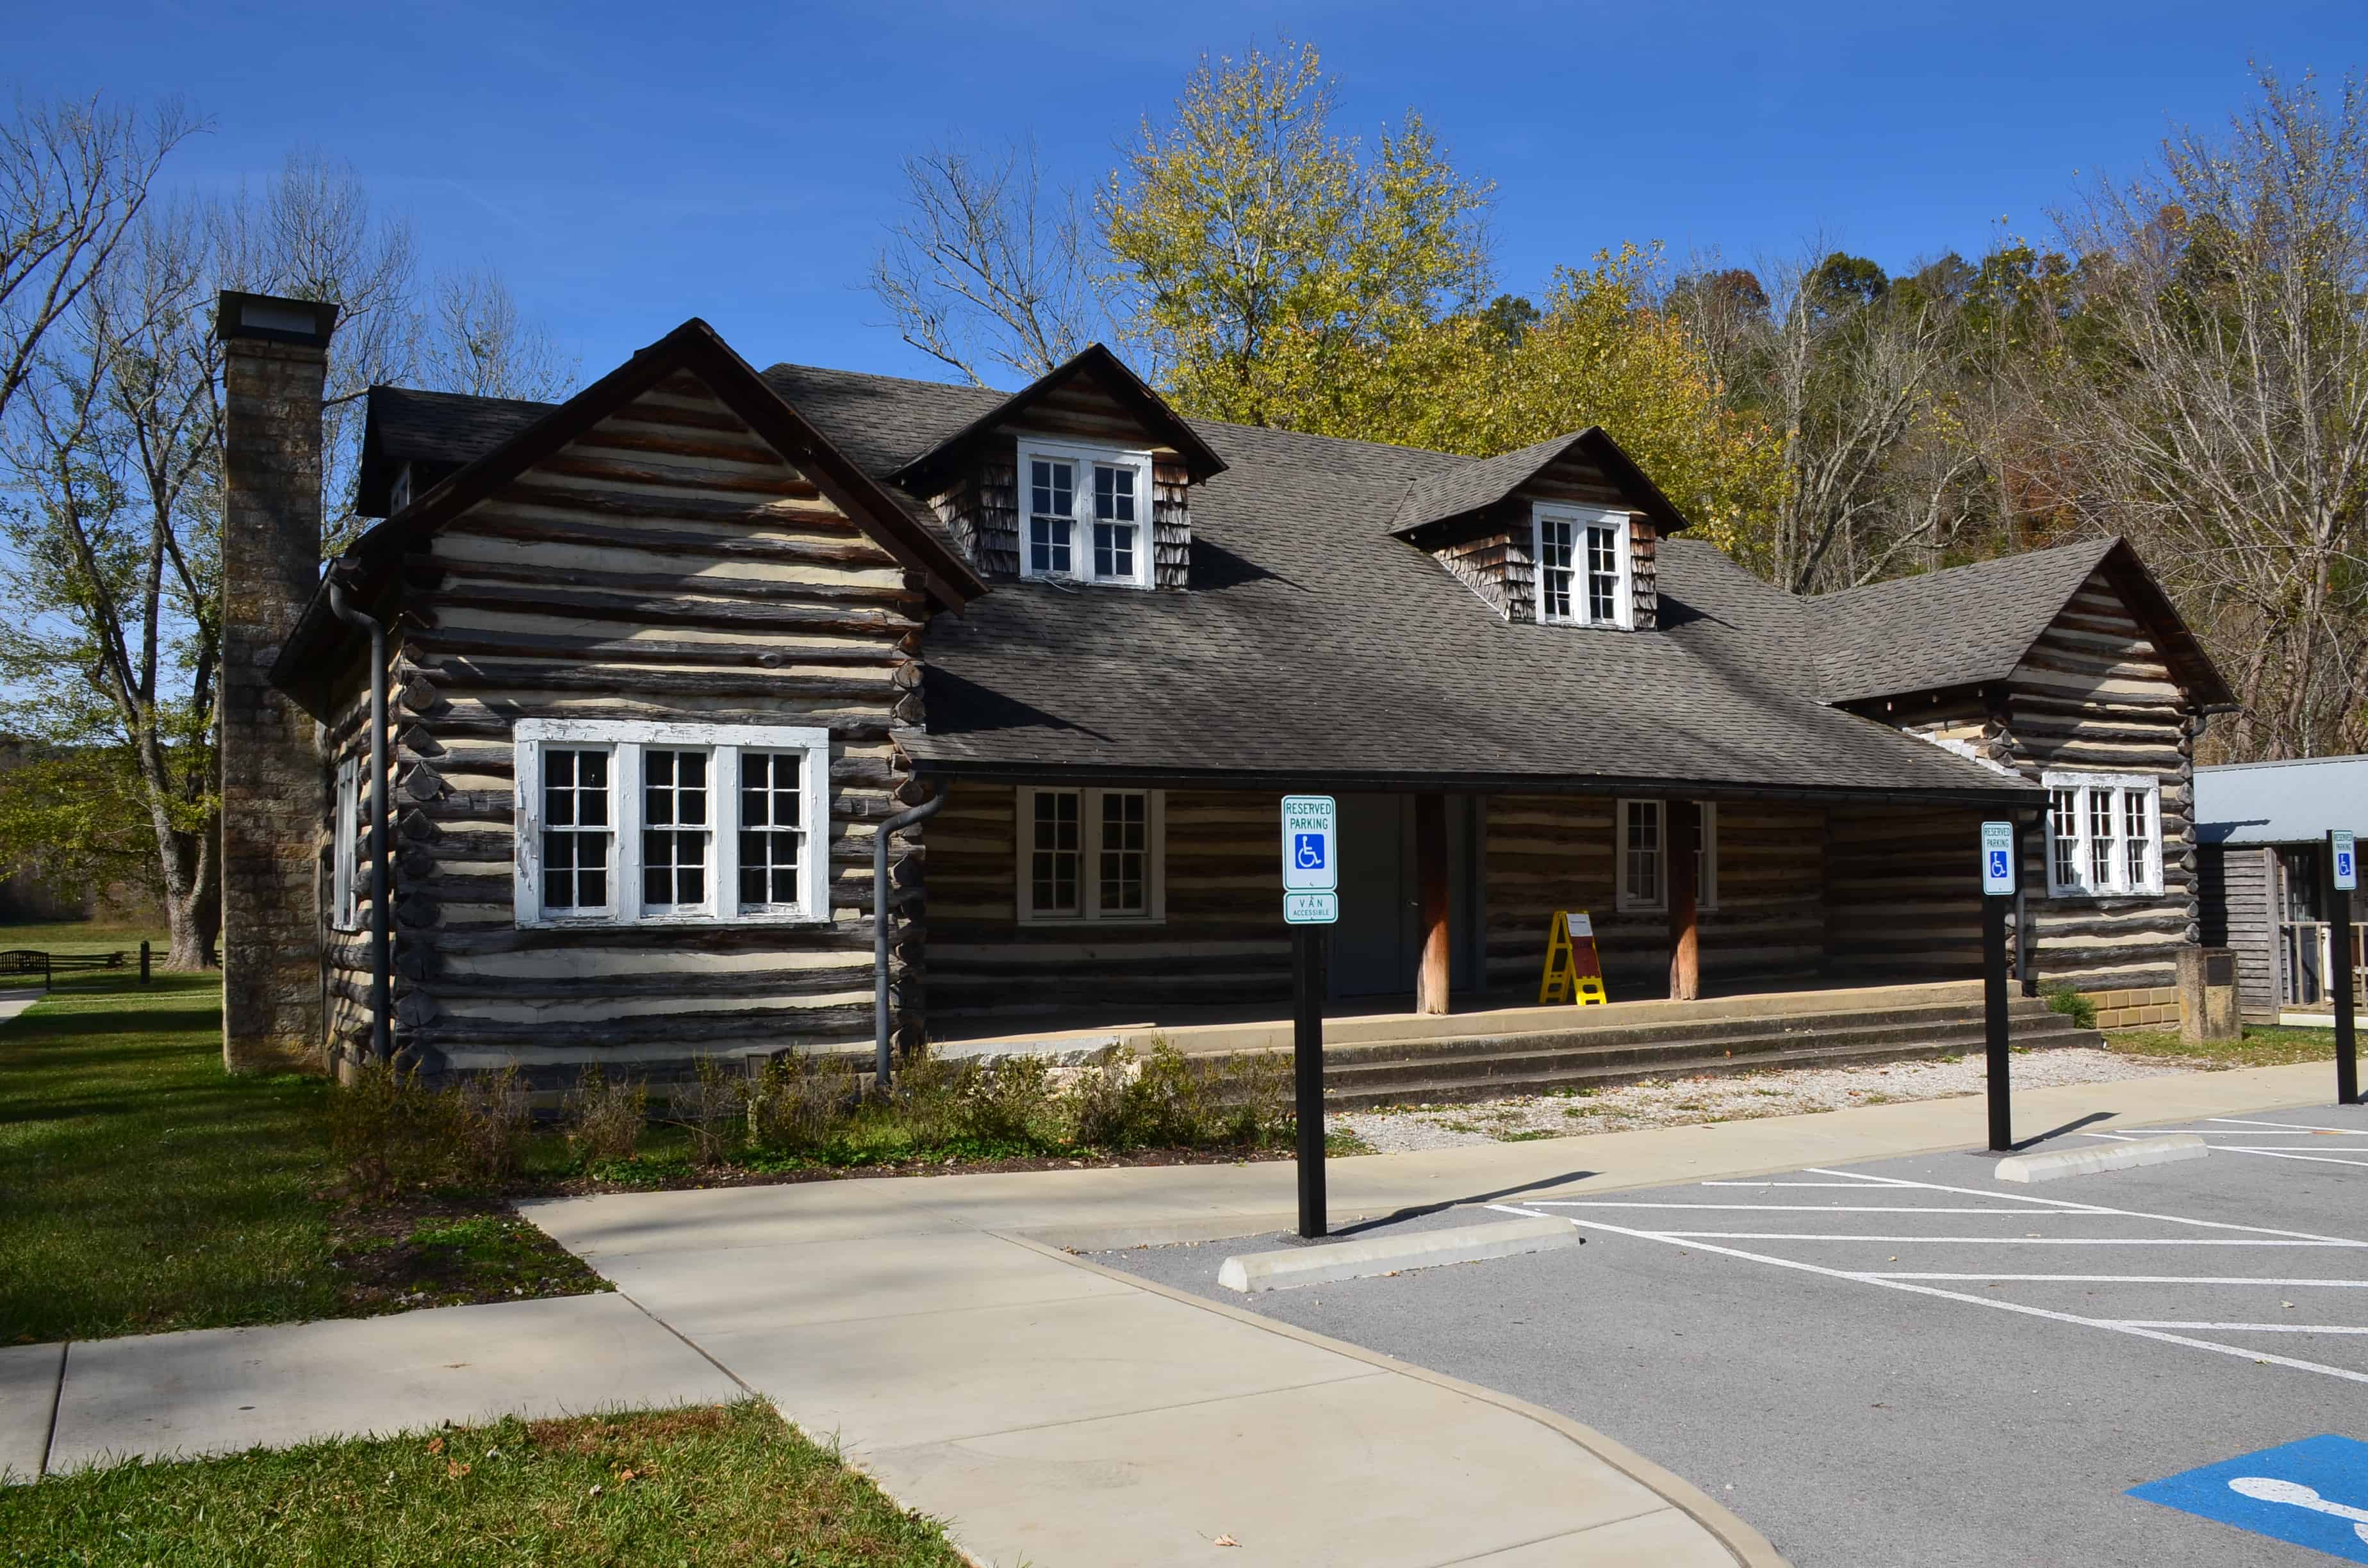 Lincoln Tavern at Abraham Lincoln Birthplace National Historical Park in Kentucky